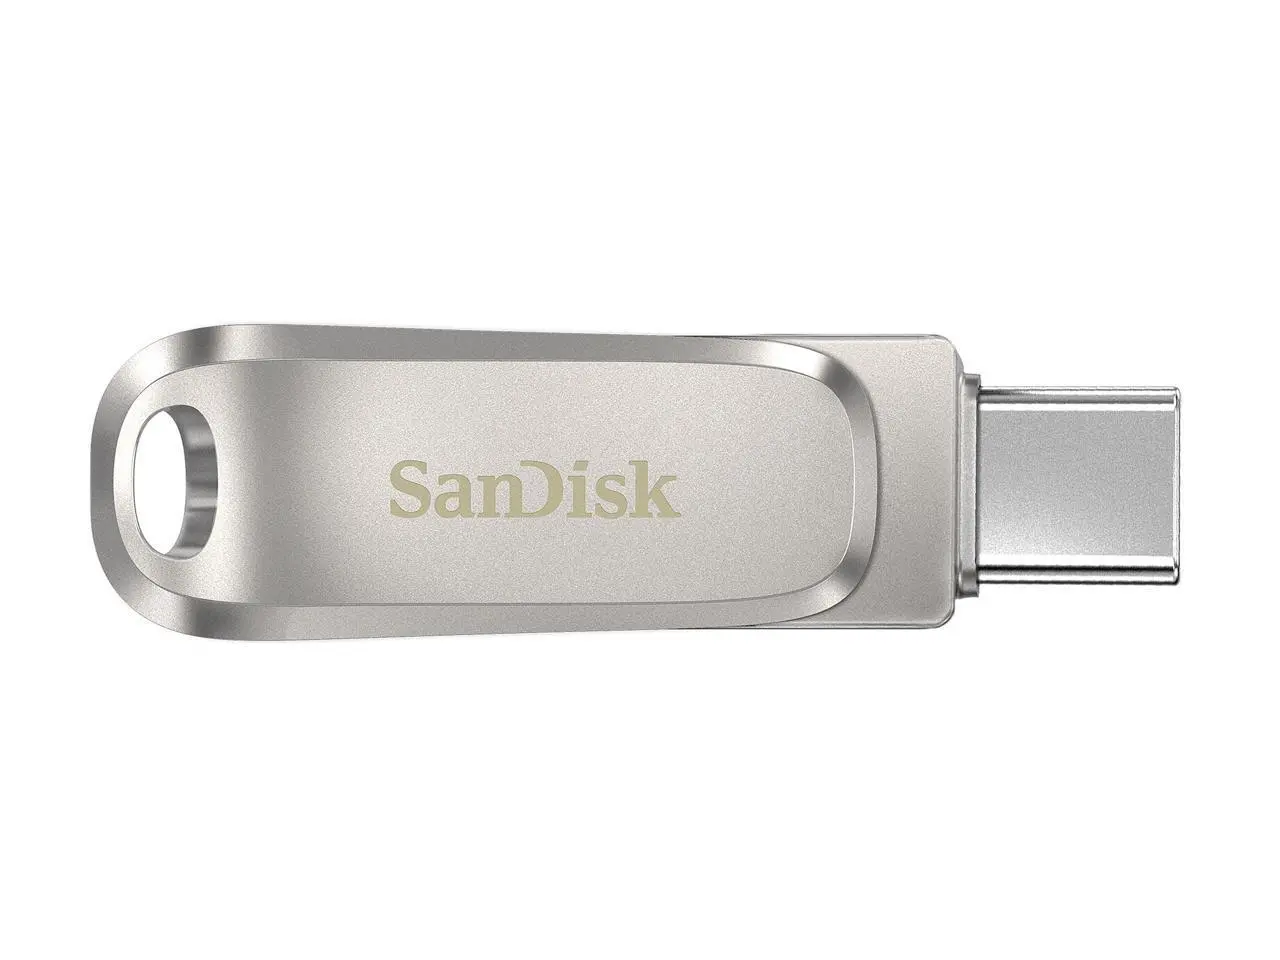 USB памет SanDisk Ultra Dual Drive Luxe, 32GB - image 1